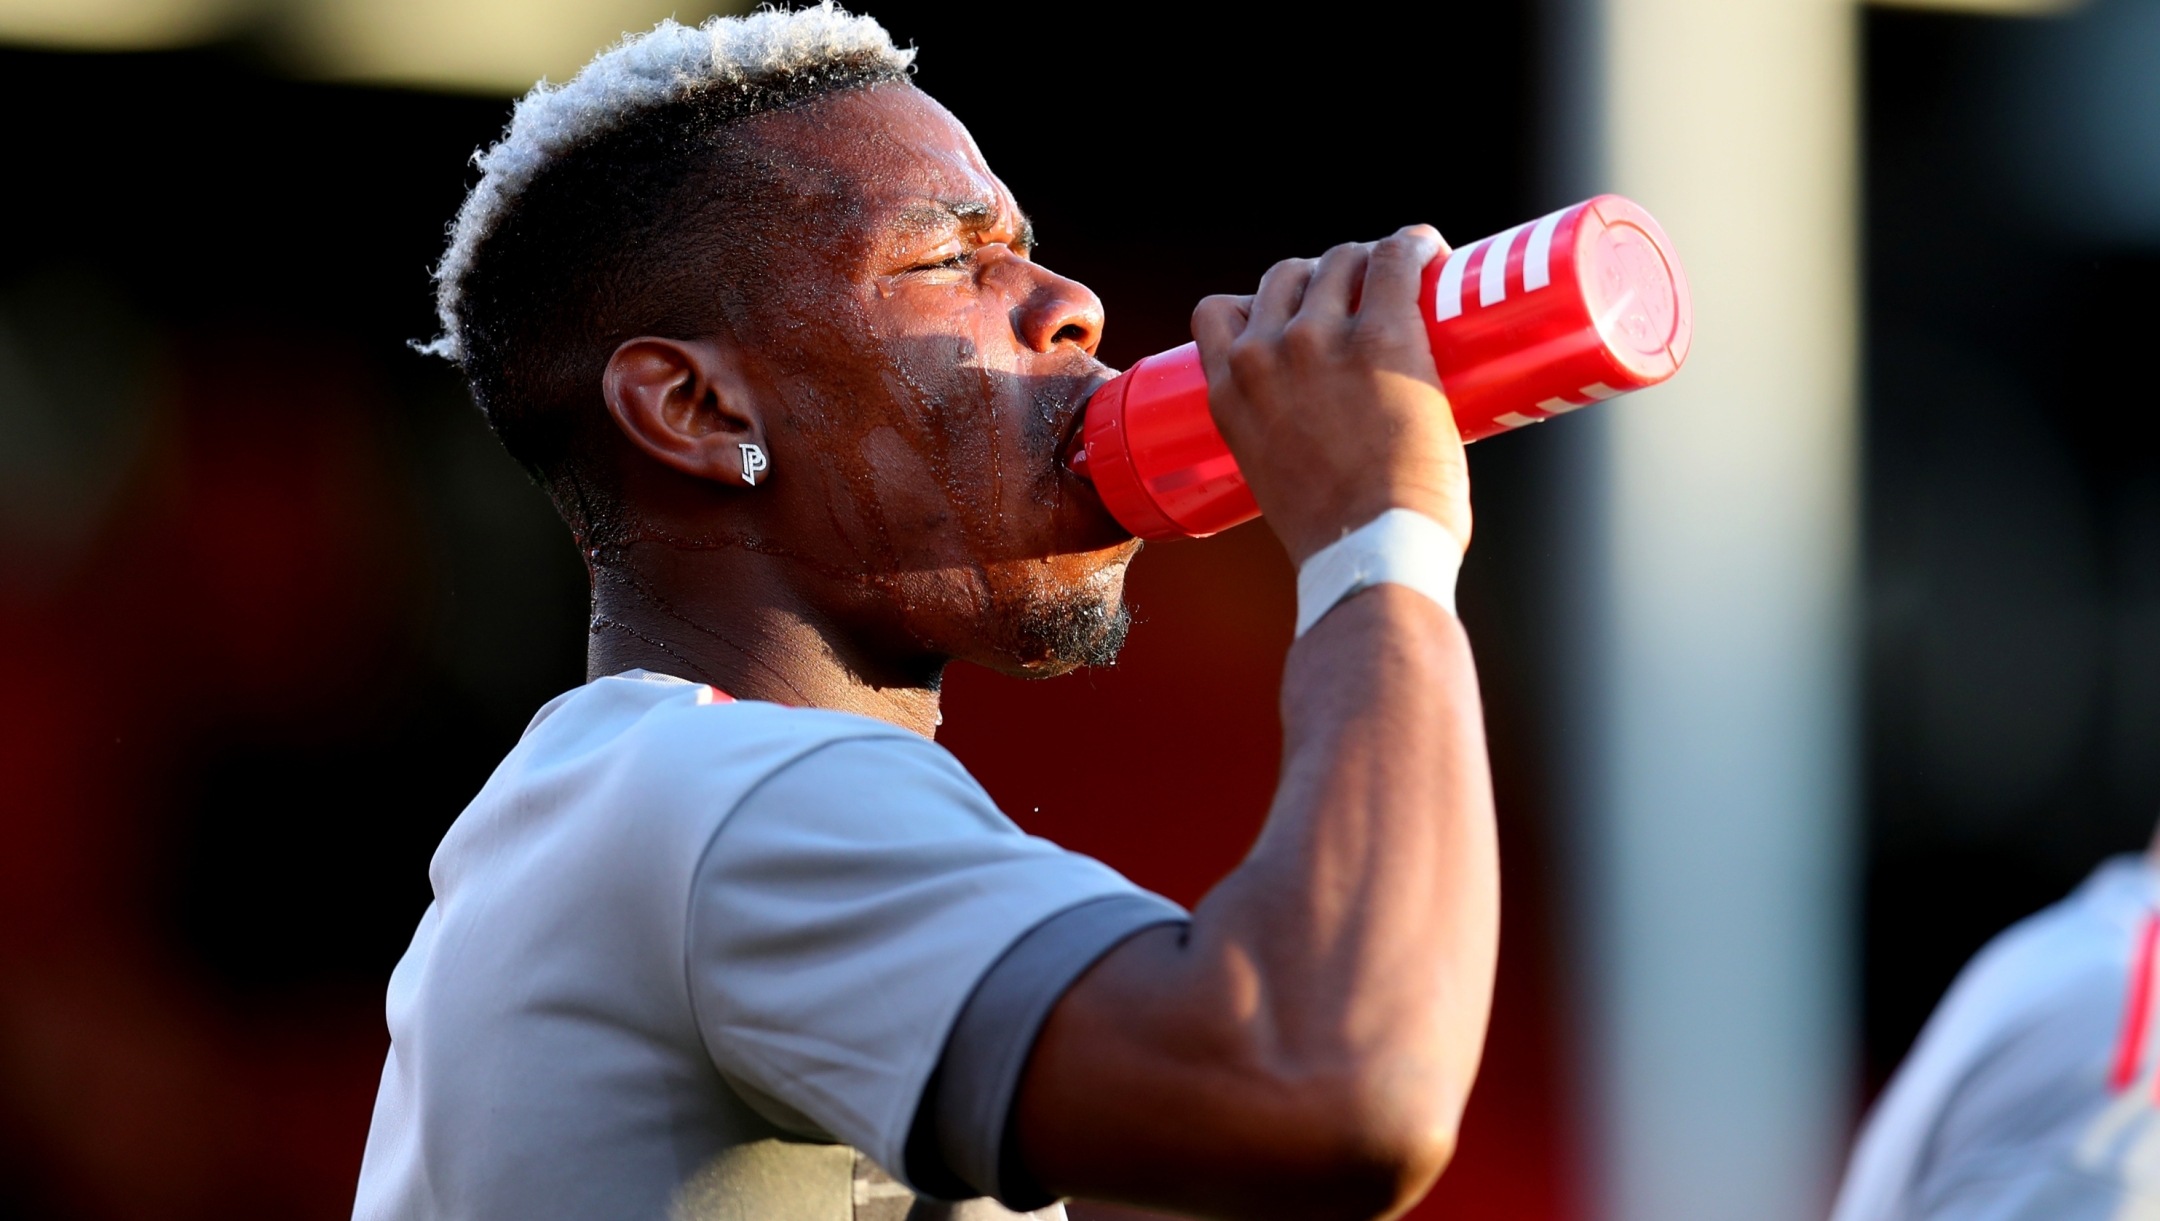 BOURNEMOUTH, ENGLAND - APRIL 18: Paul Pogba of Manchester United has a drink before the Premier League match between AFC Bournemouth and Manchester United at Vitality Stadium on April 18, 2018 in Bournemouth, England. (Photo by Catherine Ivill/Getty Images) *** Local Caption *** Paul Pogba